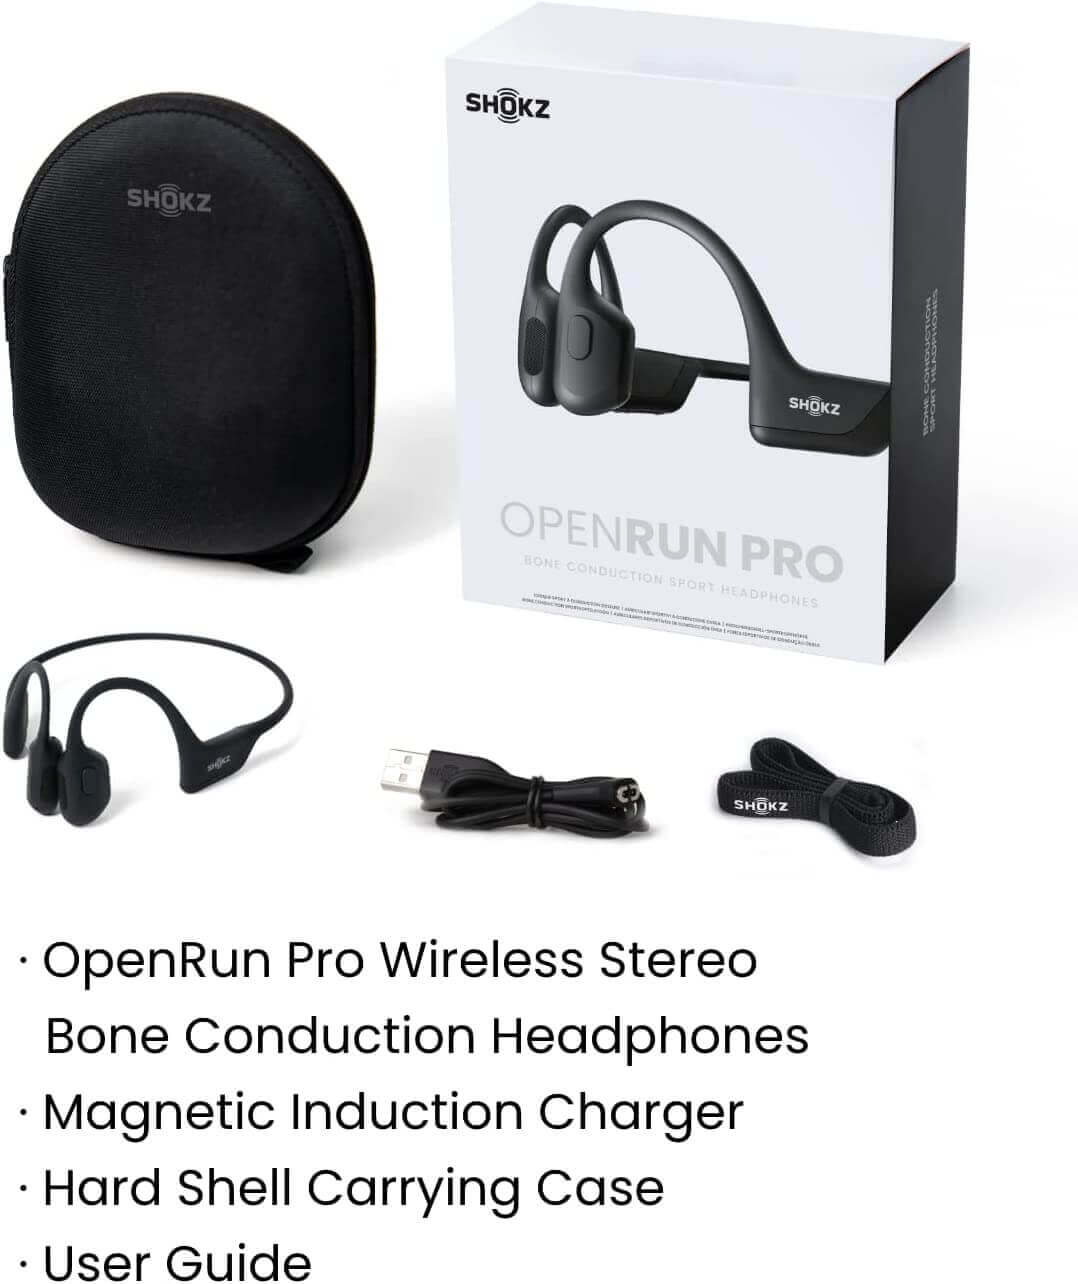 Shokz OpenRun Pro - What's In the Box? They include the OpenRun Pro Premium Bone Conduction Open-Ear Wireless Headphones (1) Magnetic Induction Charger Hard Shell Carrying Case User Guide SHOKZ Headband